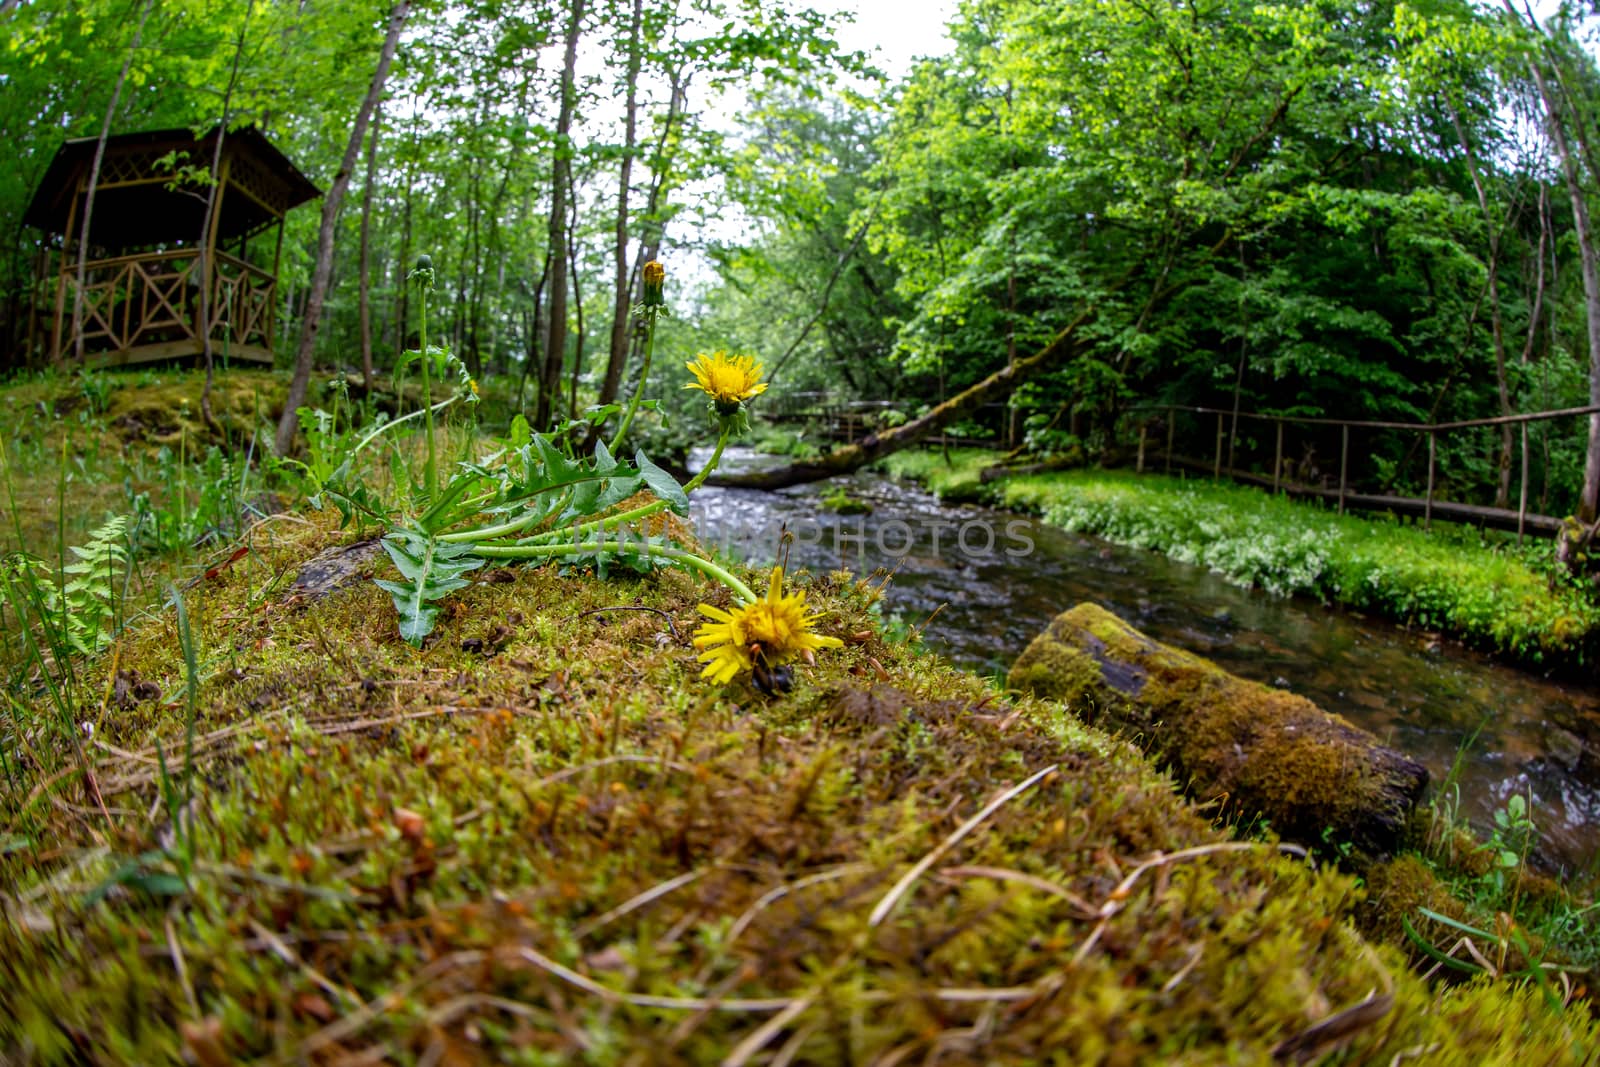 Moss covered forest with river, wooden bridge and hut in background. Dandelions in the foreground and river with moss grown log in the background. Shot with fisheye lens. 